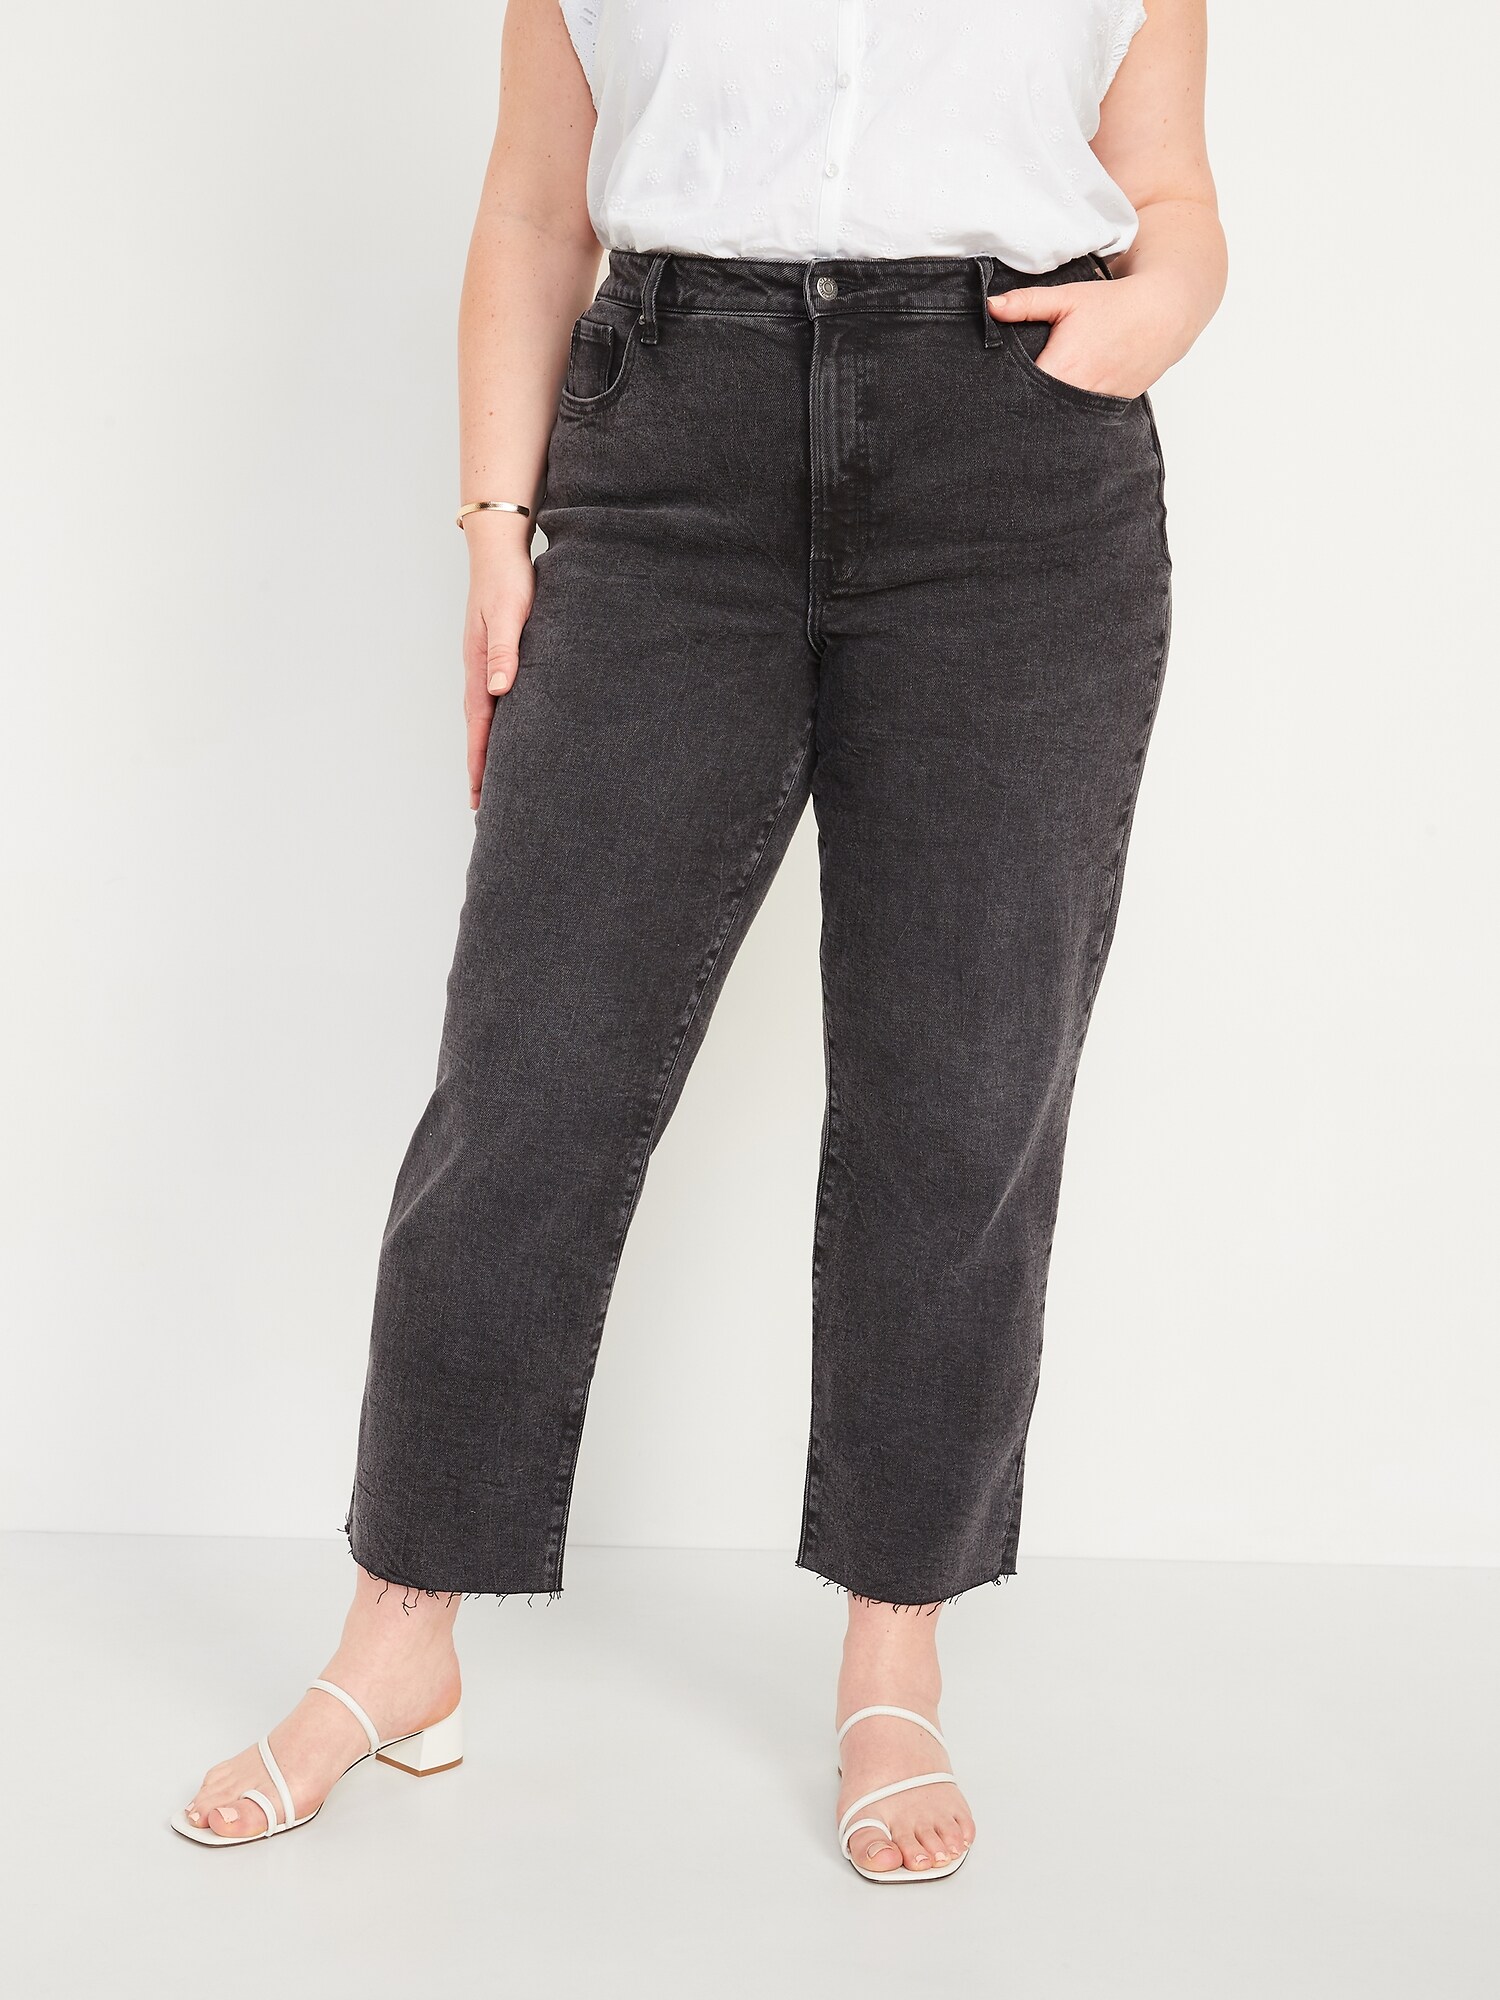 High-Waisted OG Loose Gray Cut-Off Jeans for Women